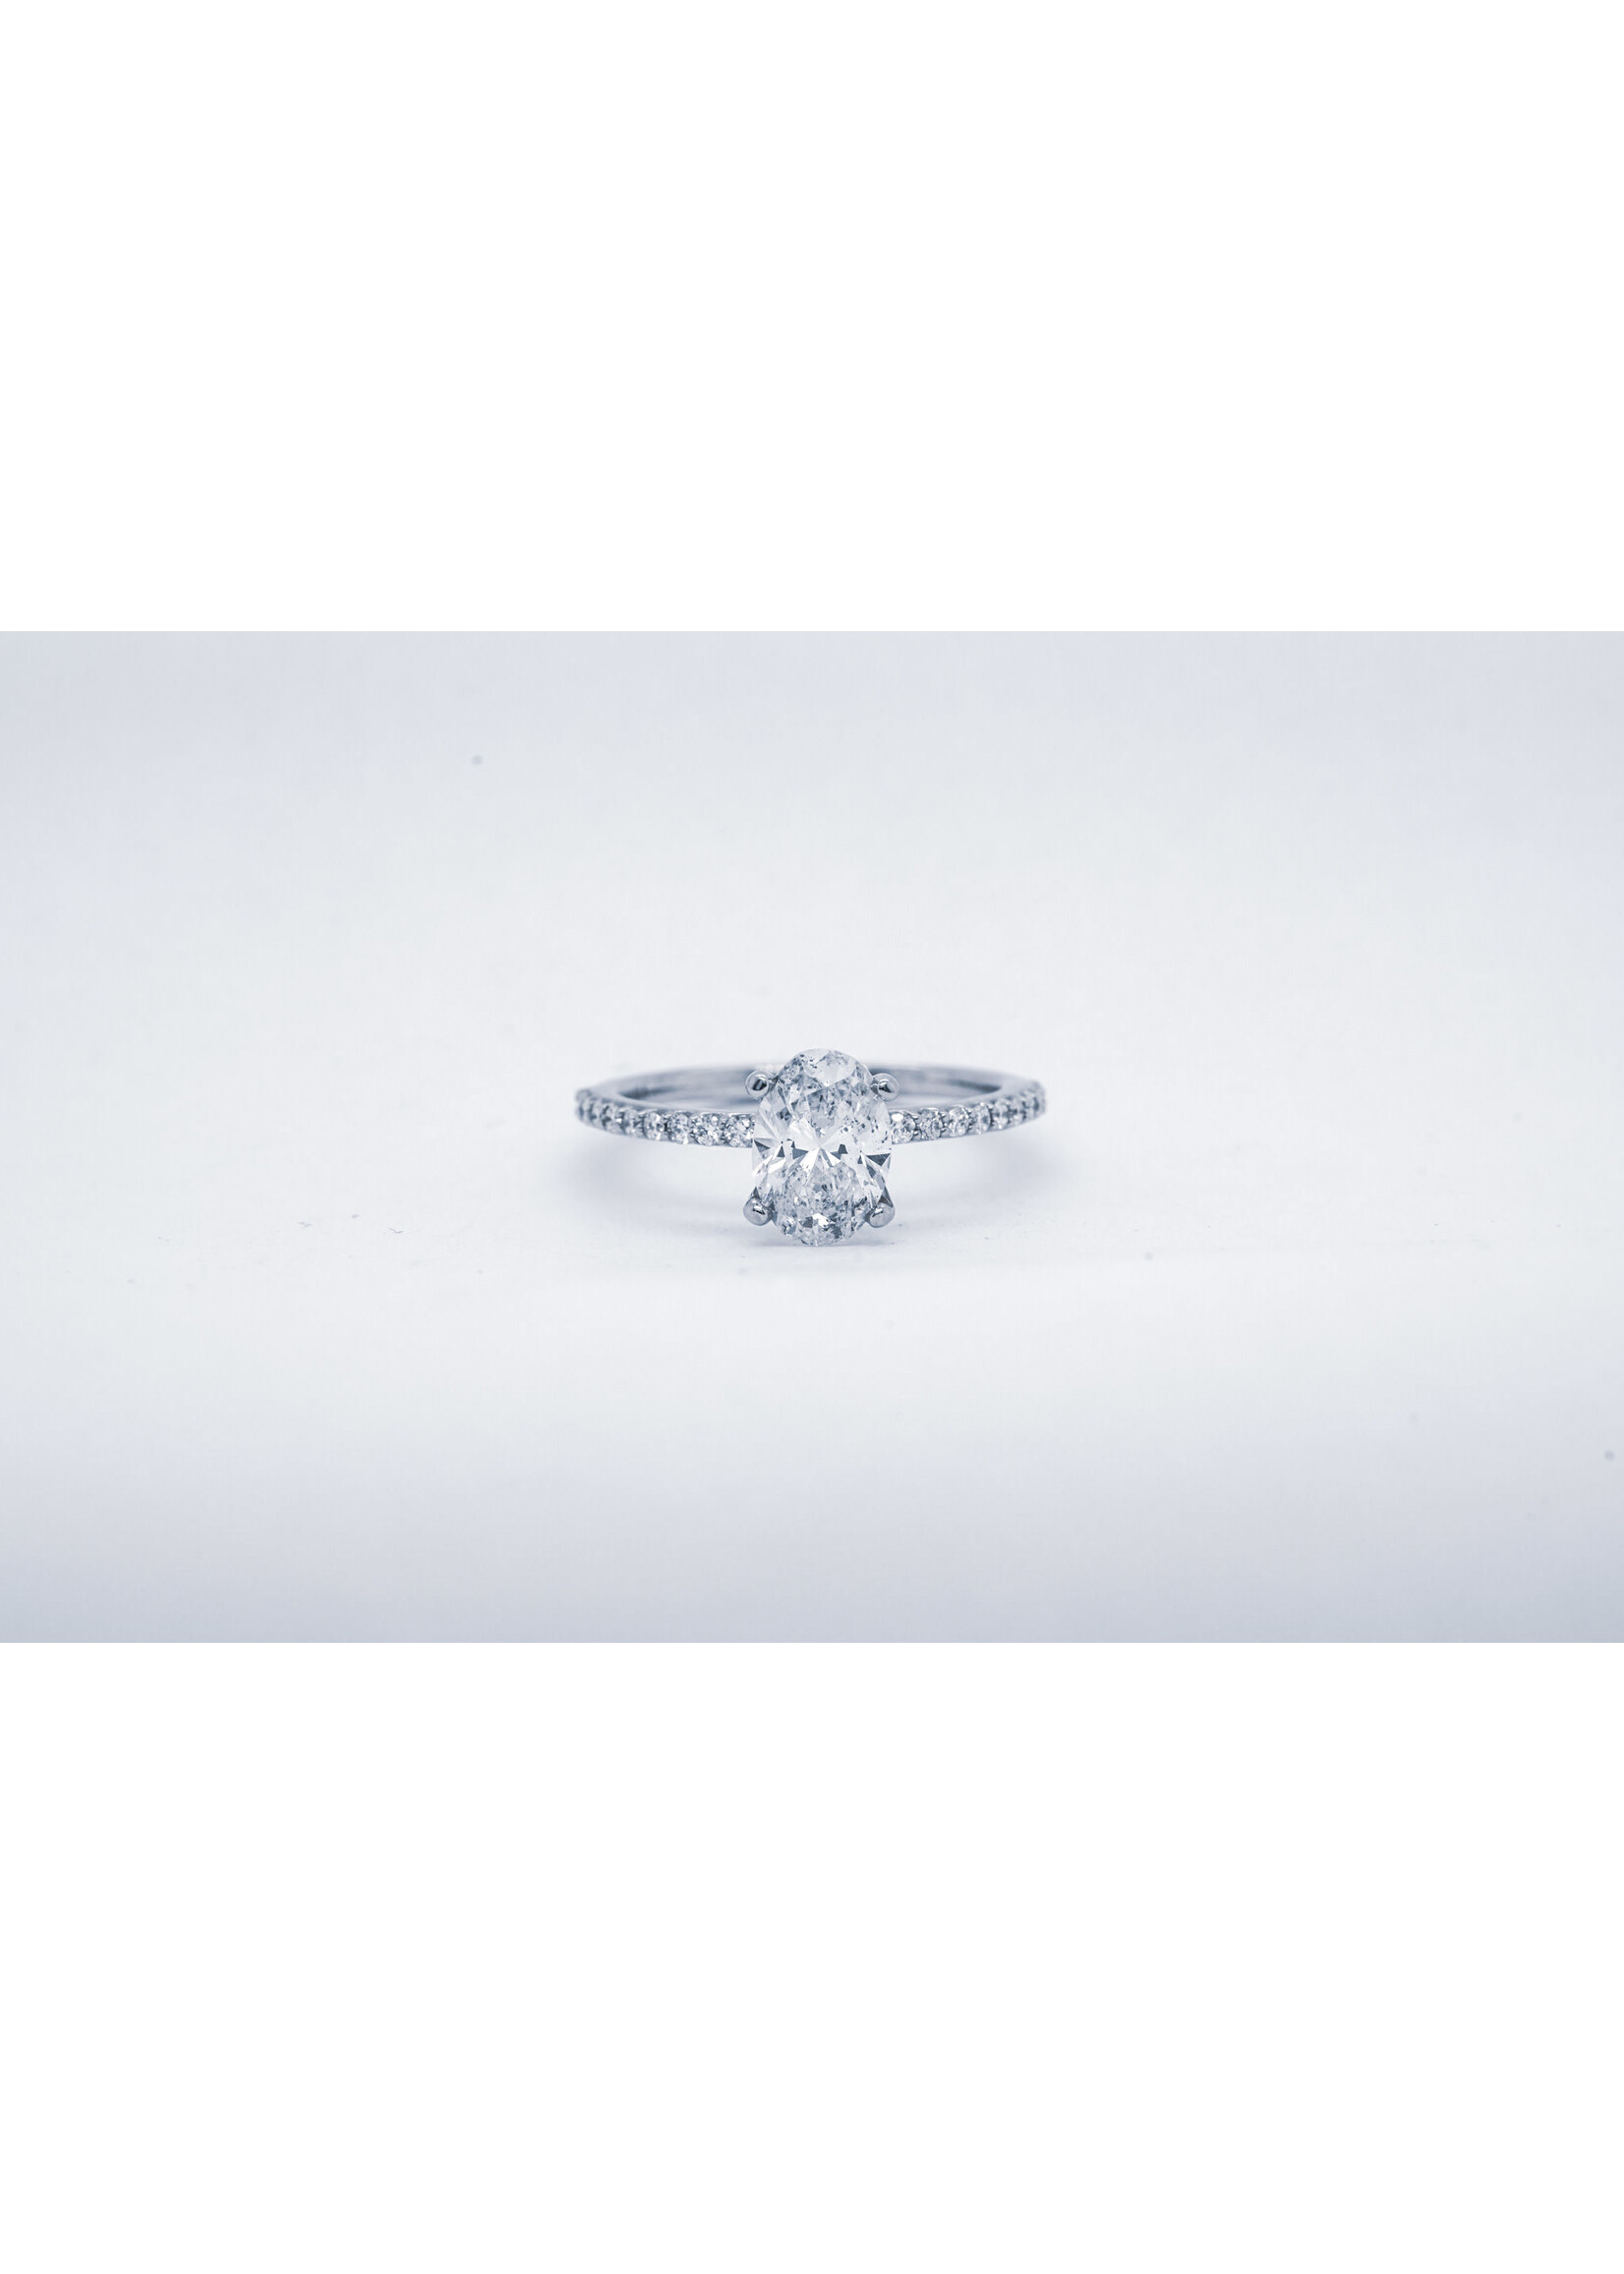 14KW 2.51g 1.74ctw (1.52ctr) E/SI2 Oval Diamond Engagement Ring (size 7)